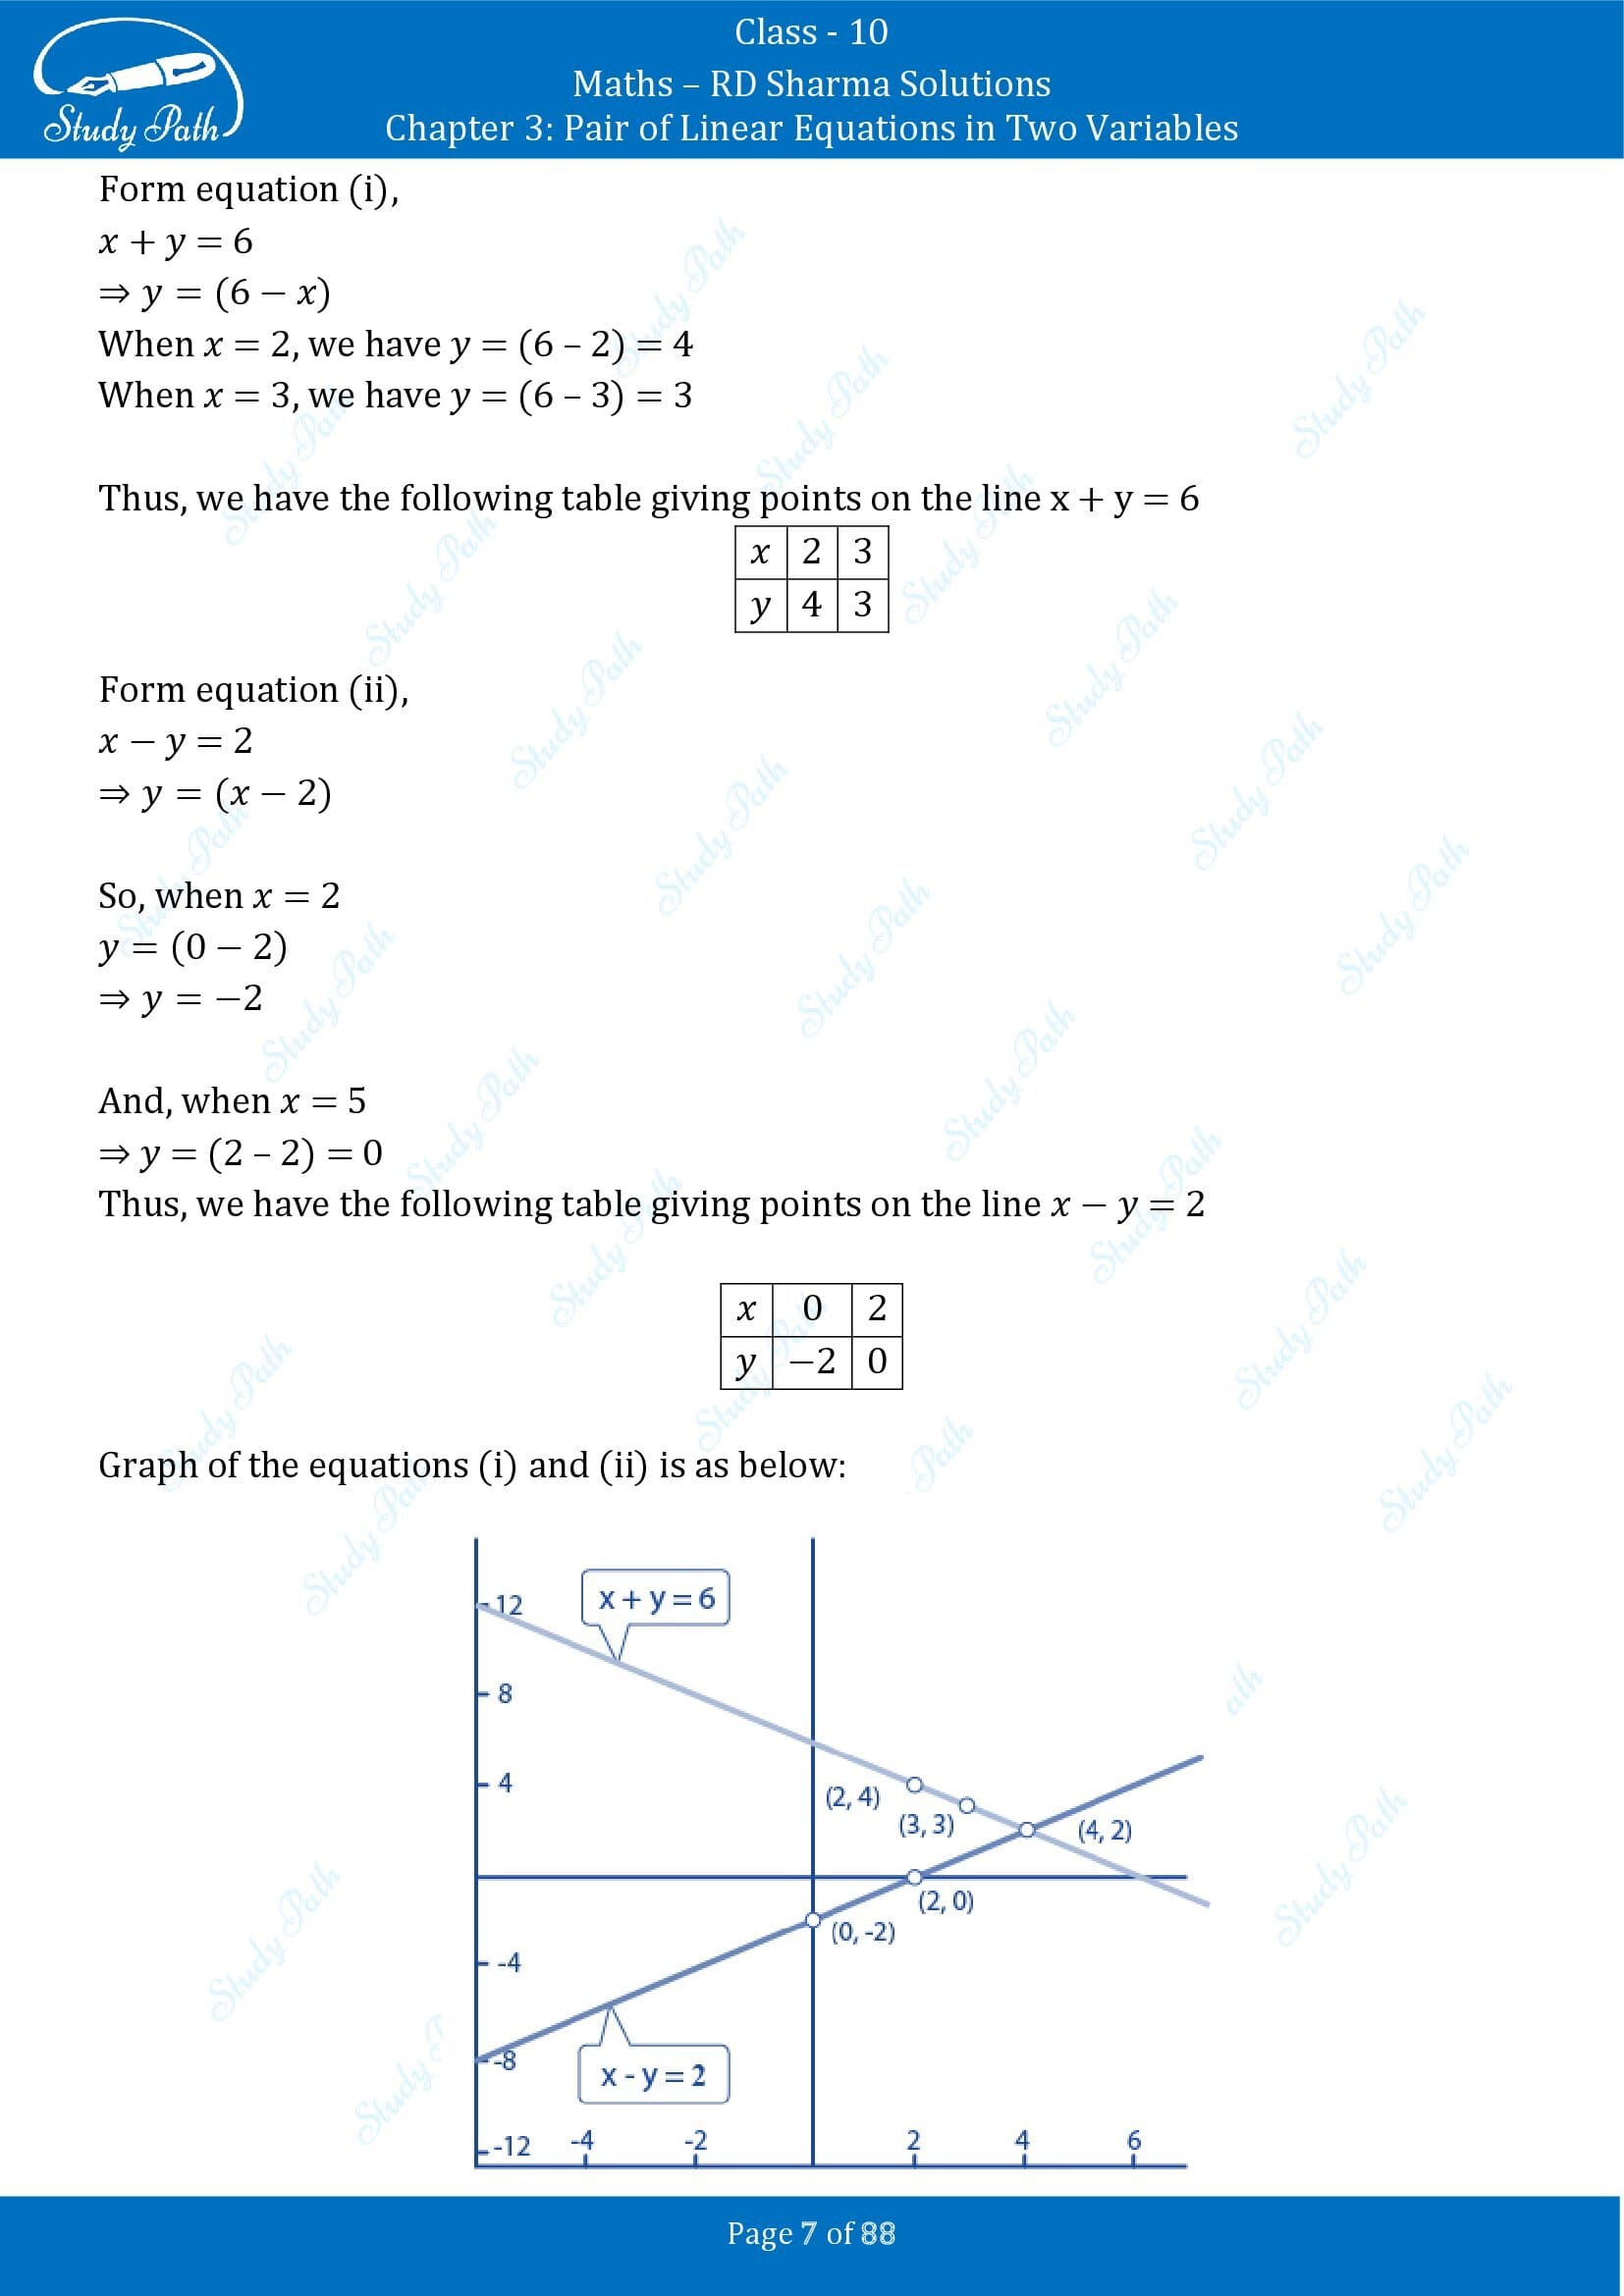 RD Sharma Solutions Class 10 Chapter 3 Pair of Linear Equations in Two Variables Exercise 3.2 00007